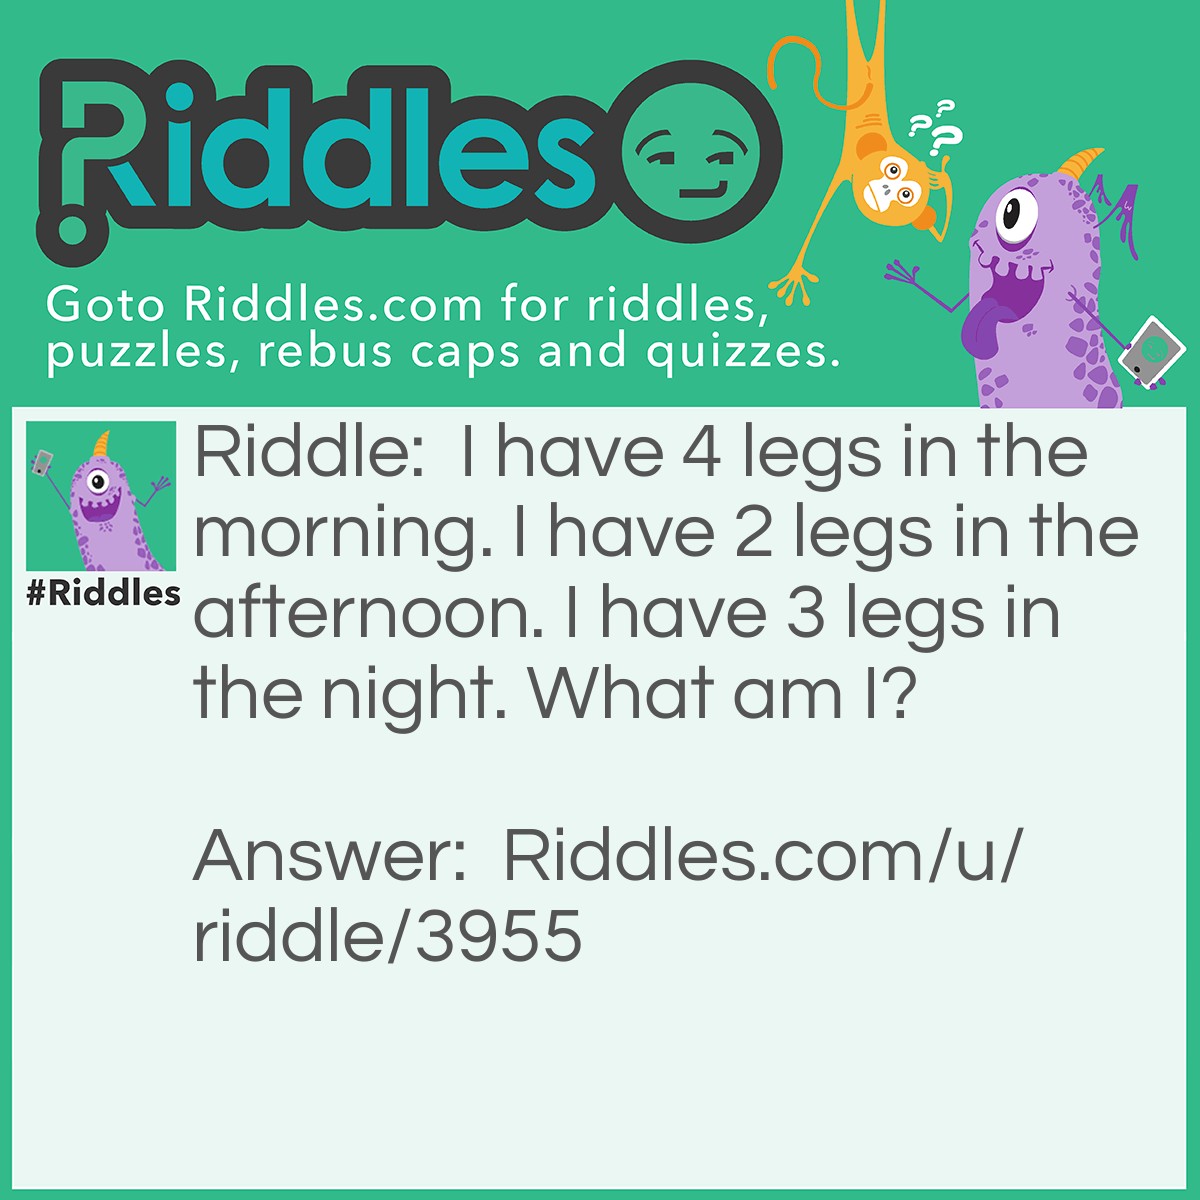 Riddle: I have 4 legs in the morning. I have 2 legs in the afternoon. I have 3 legs in the night. What am I? Answer: A Human.